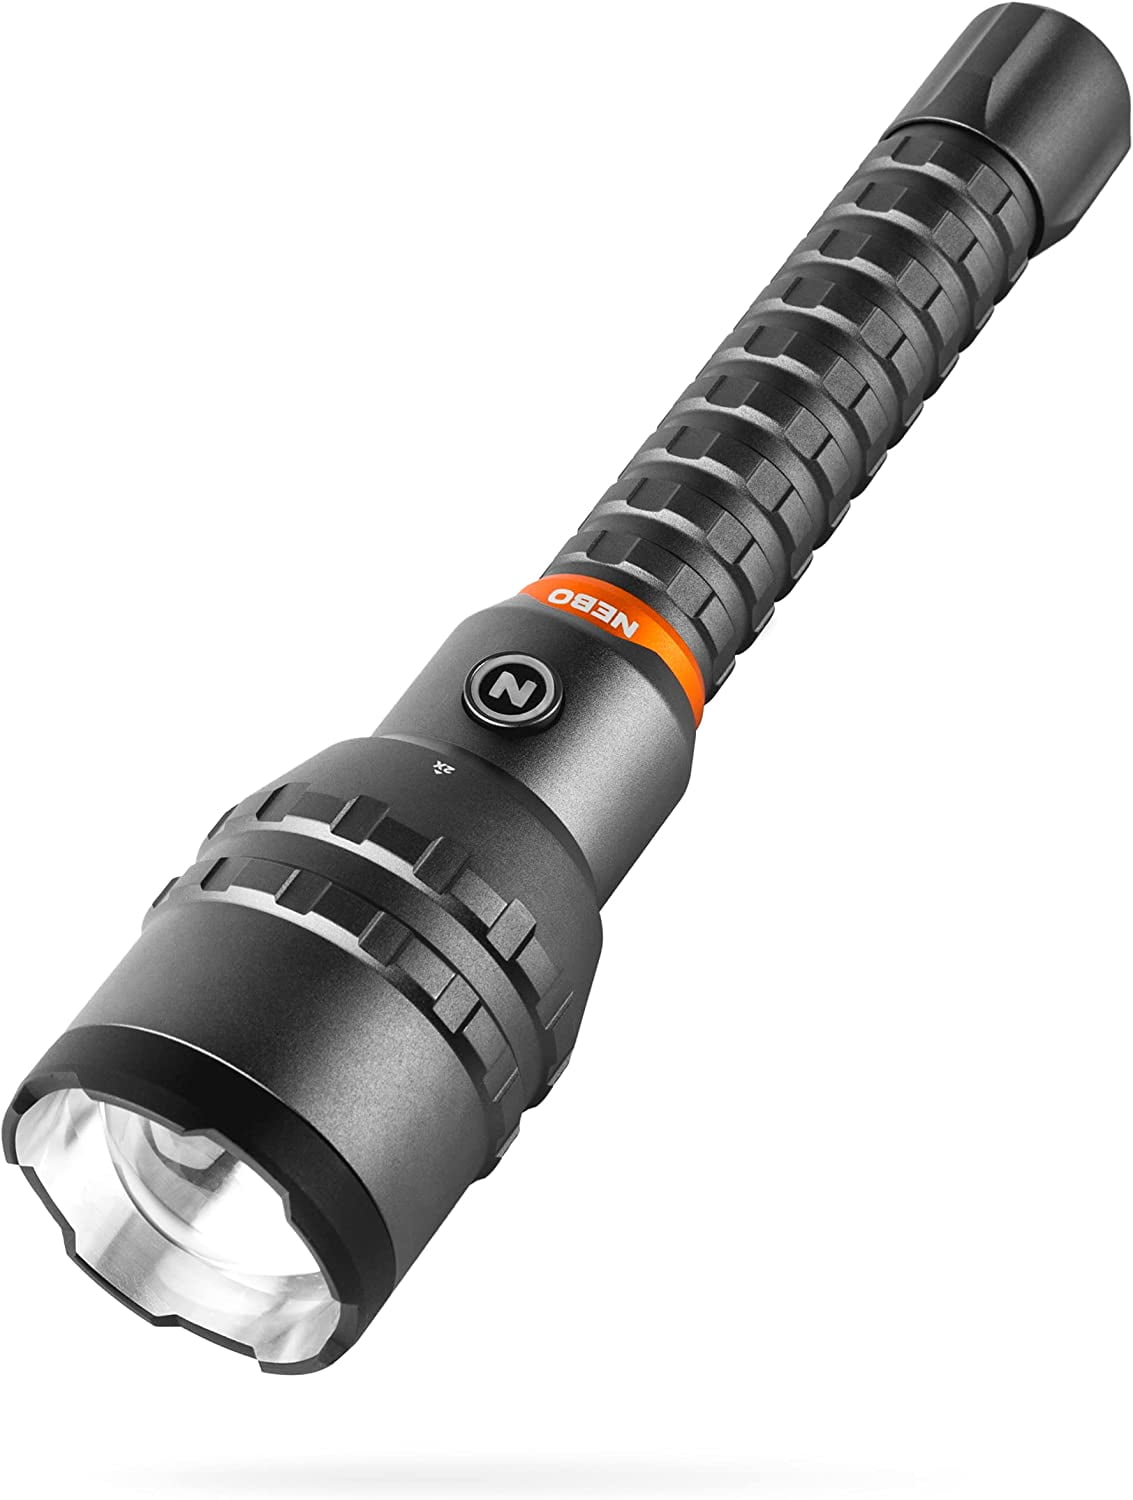 NEBO 12000 Rechargeable Flashlight with 2x Zoom, 5 Light Modes, Waterproof  (IP67), and Power Bank, Bright Flashlight for Everday Carry, Hunting,